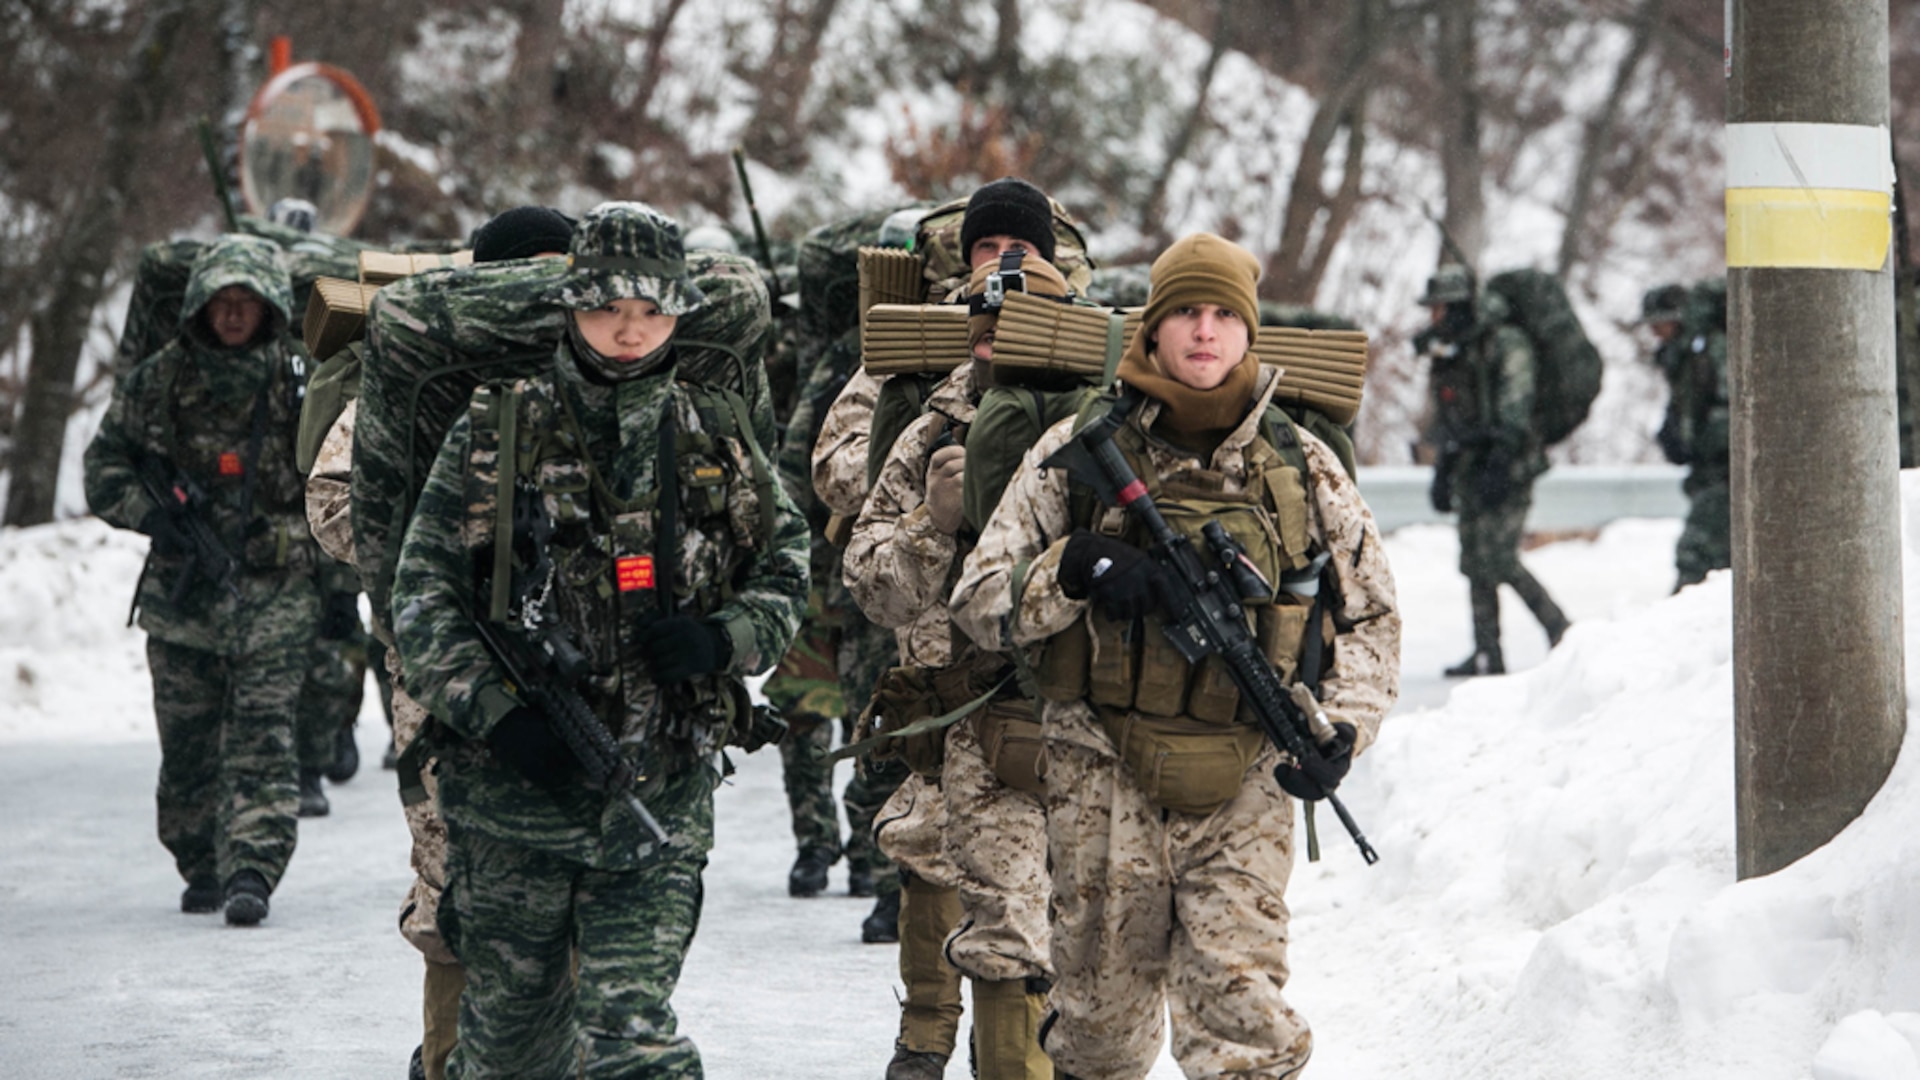 In this file photo, U.S. and Republic of Korea Marines hike a 35- km path up a mountain Jan. 15 during Korean Marine Exchange Program 15-3 in Pyeongchang, Republic of Korea. The U.S. Marines hiked side-by-side with their ROK Marine counterparts through snow and ice. The U.S. Marines are reconnaissance men with Alpha Company, 3rd Reconnaissance Battalion, 3rd Marine Division, III Marine Expeditionary Force. The ROK Marines are force reconnaissance men with 2nd Battalion, 2nd Marine Division. 